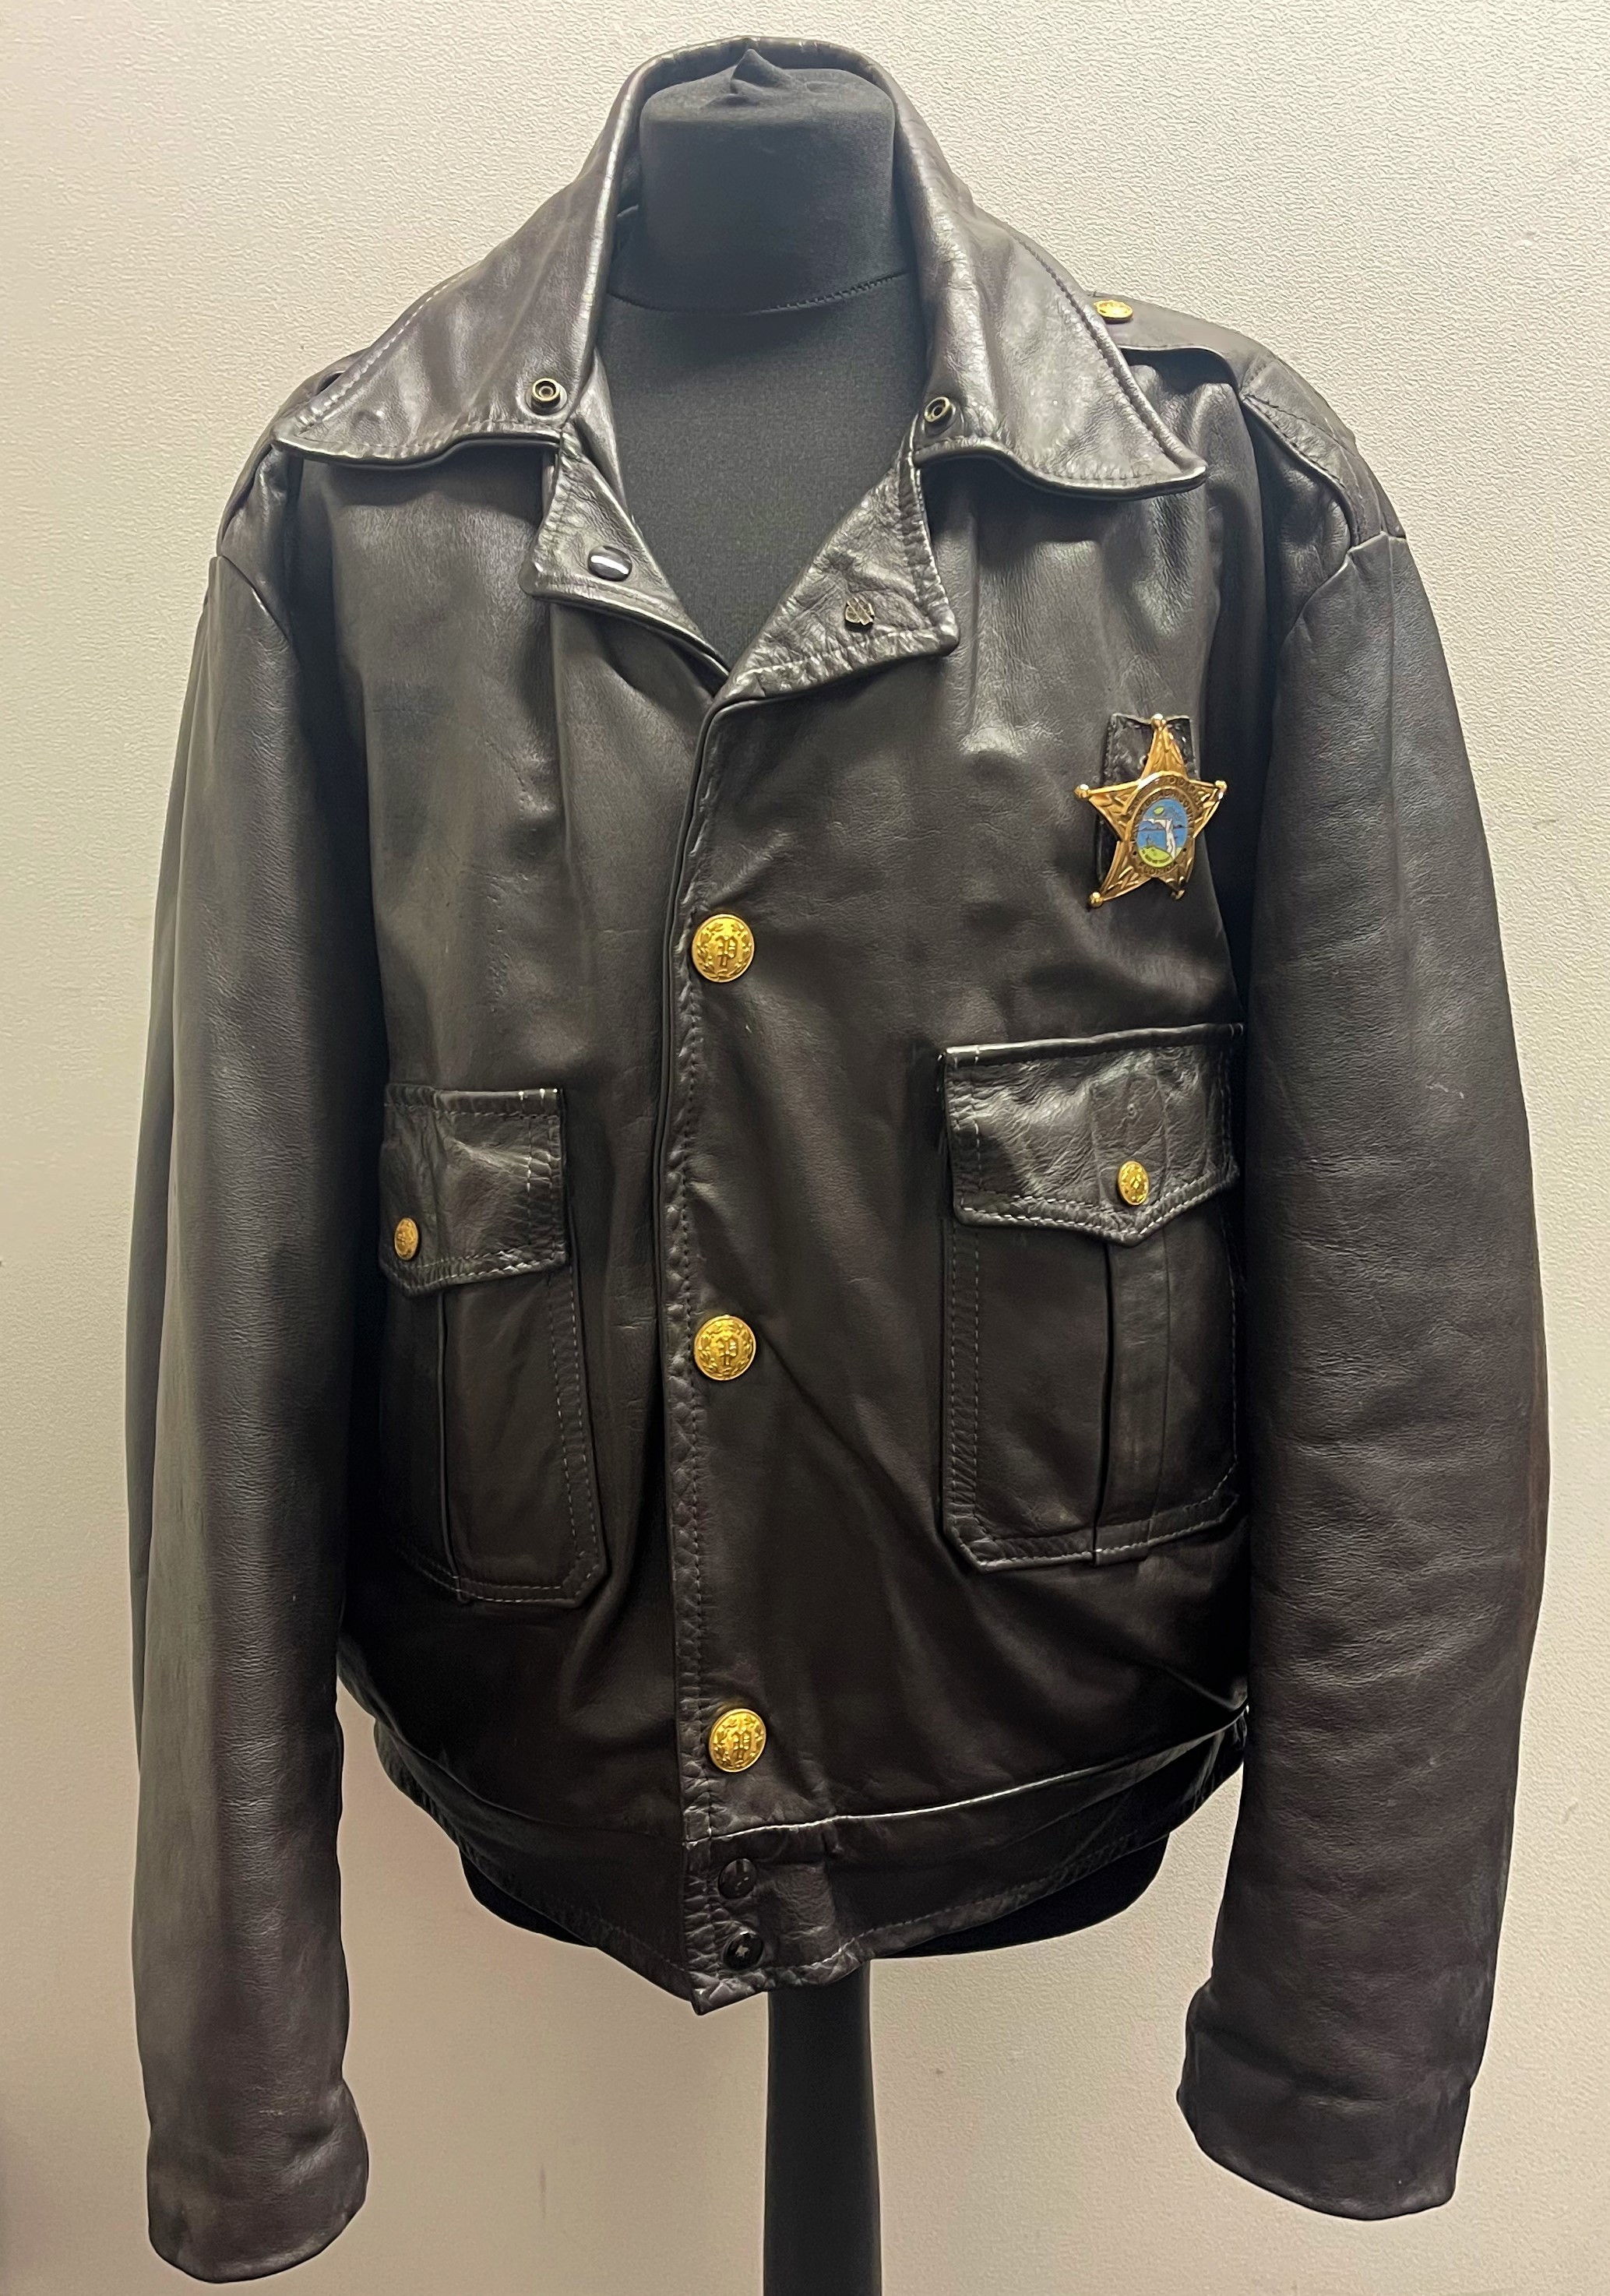 42 Five Beach jacket. County Brown Palm Size in Leather Sherrifs Motorcyclists US Police Dept chest.